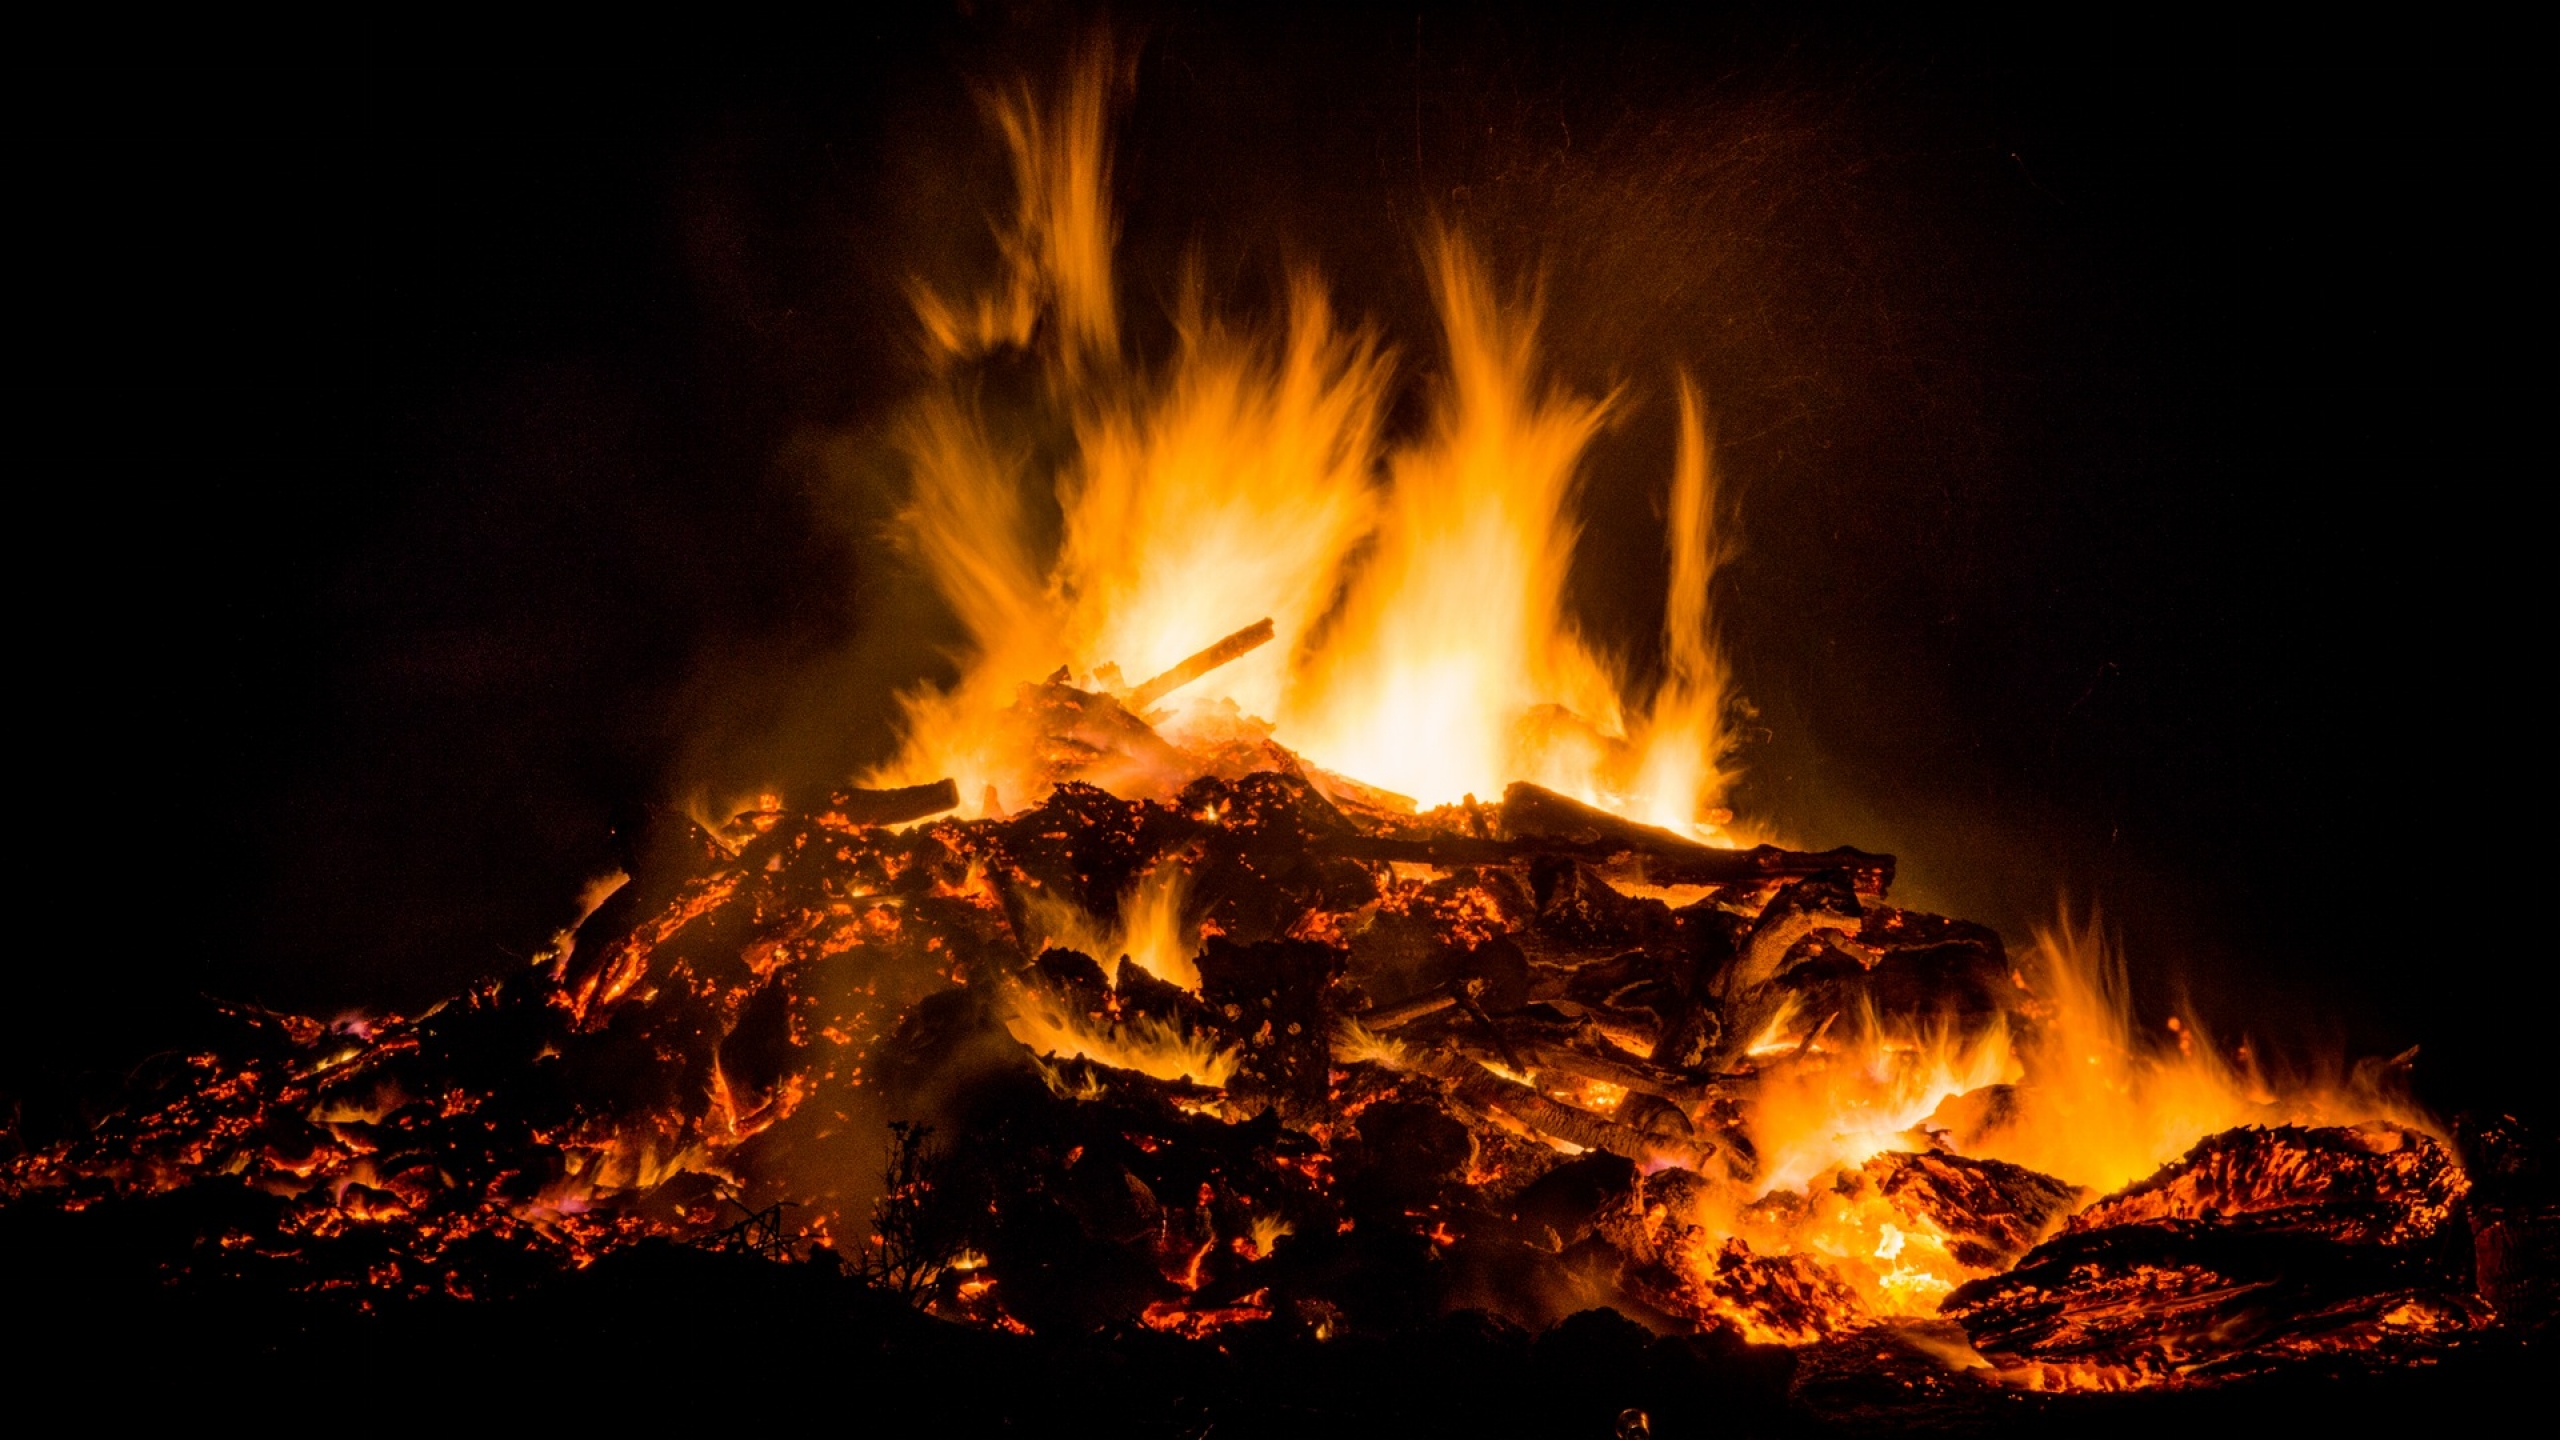 Bonfire Full HD Wallpaper and Background Image | 2560x1440 | ID:698393